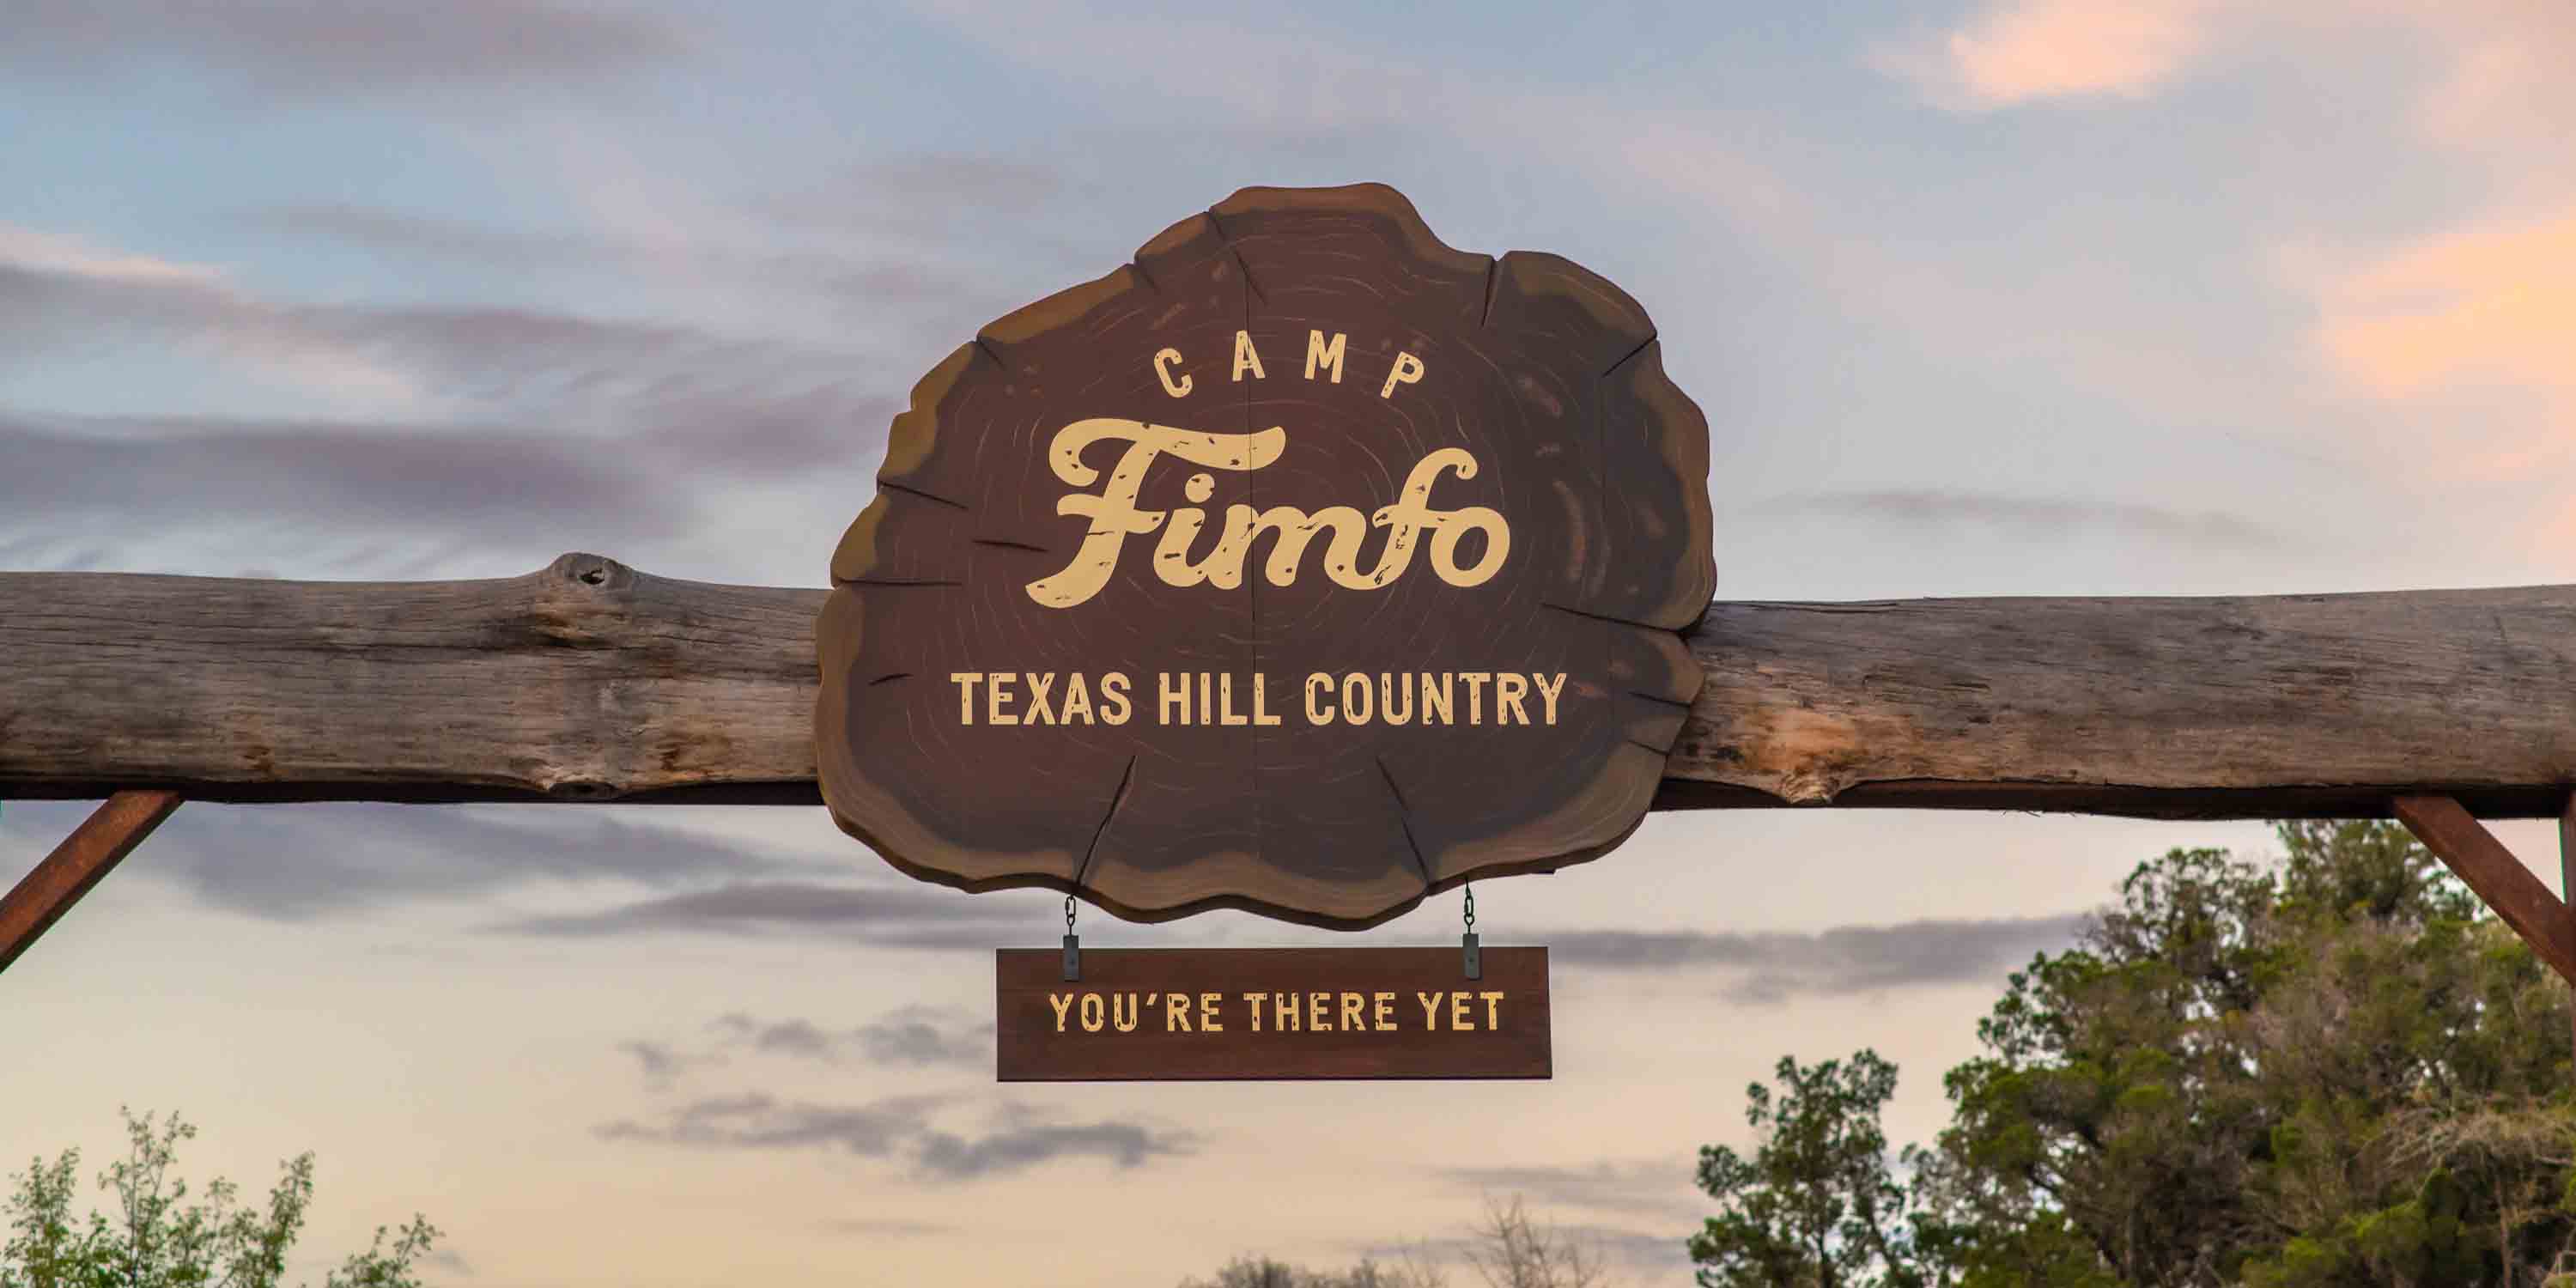 The entrance sign at Camp Fimfo Texas Hill Country